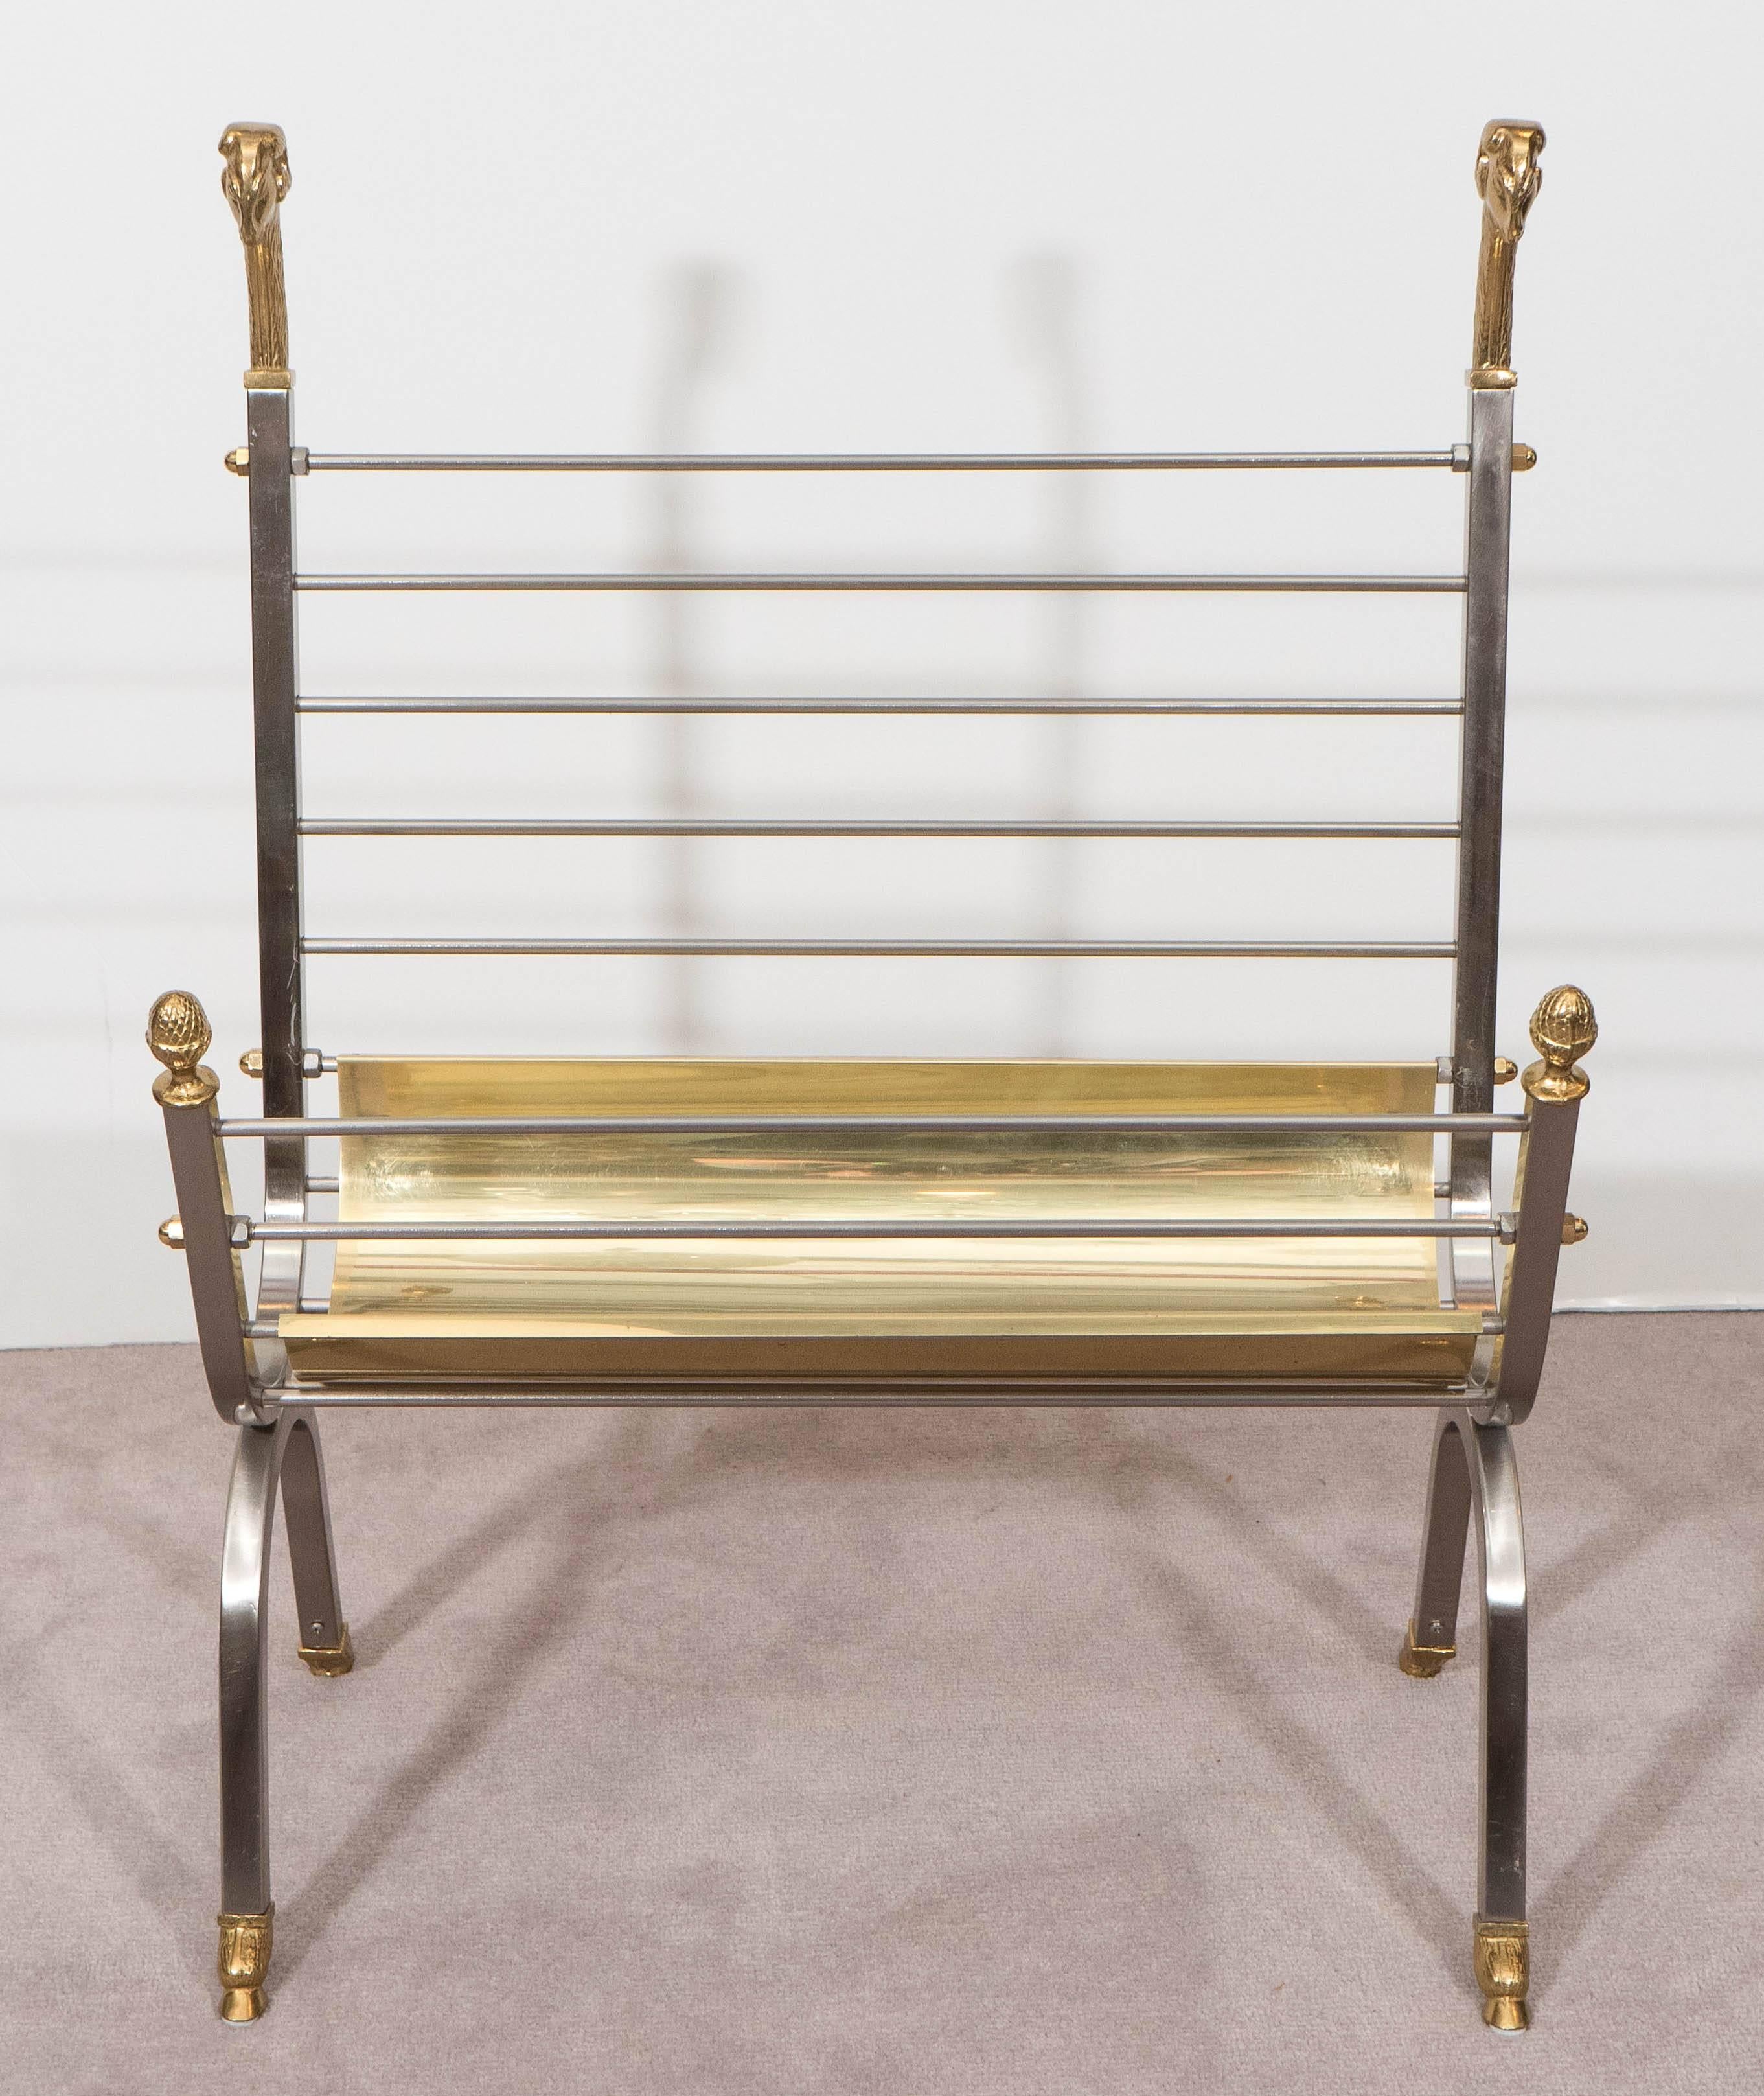 A vintage magazine rack, produced in Italy circa 1970s, with details of ram's heads and acorn finials, surmounting the brushed steel frame and rack on hoof feet, inset by polished curved brass insert. Markings include label [Made in Italy] affixed